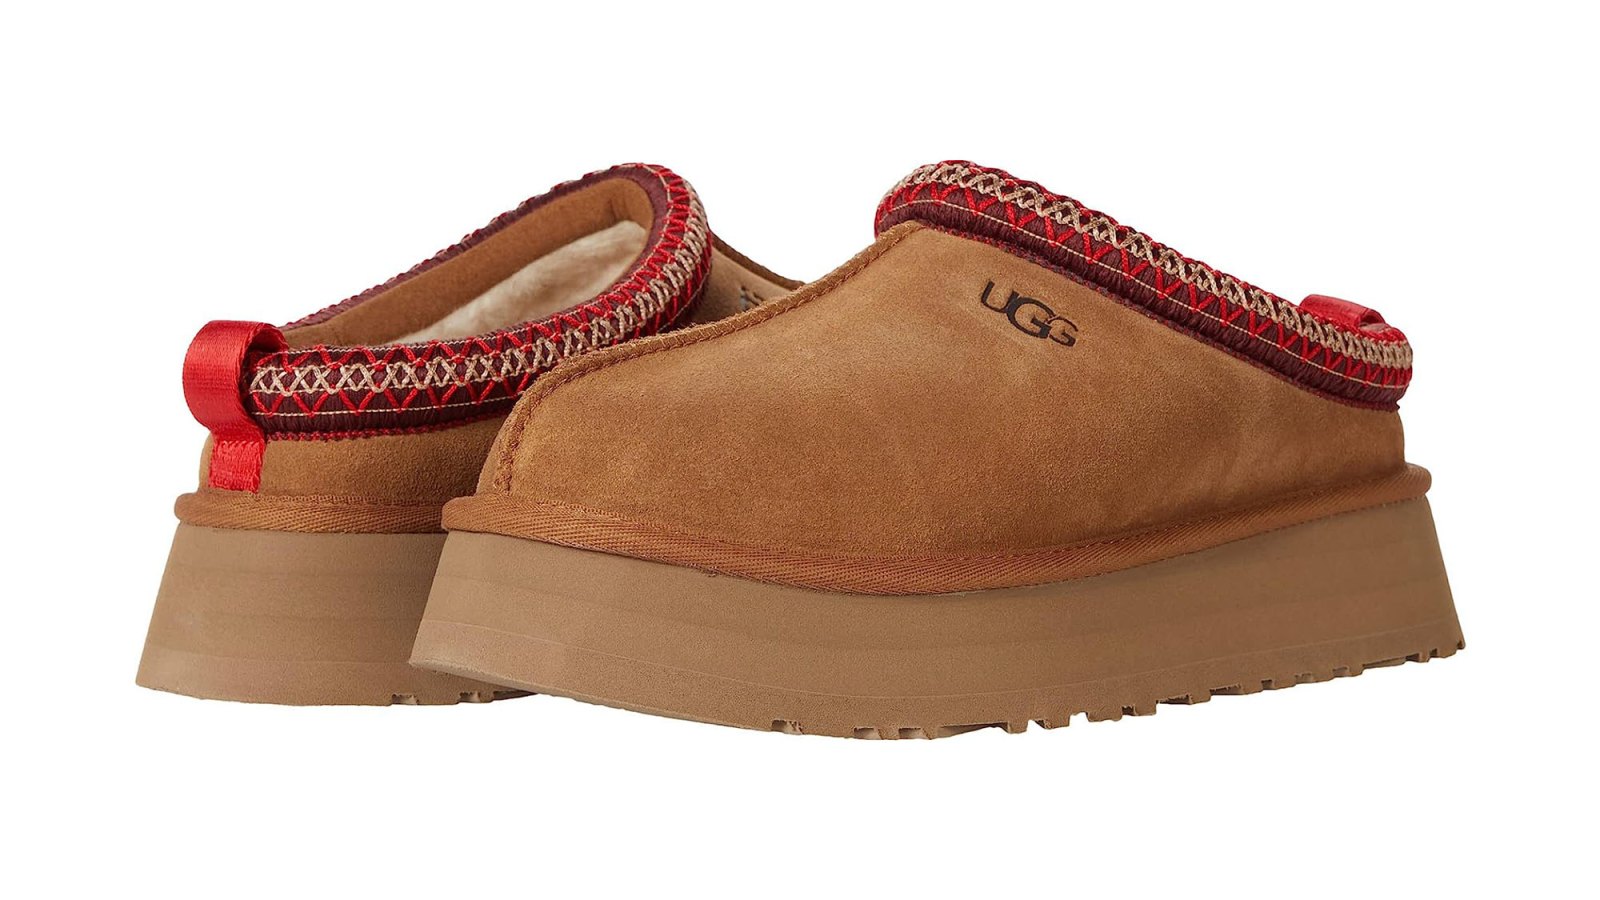 Why UGG Tasman Slippers Are the Perfect Summer to Fall Transition Shoe